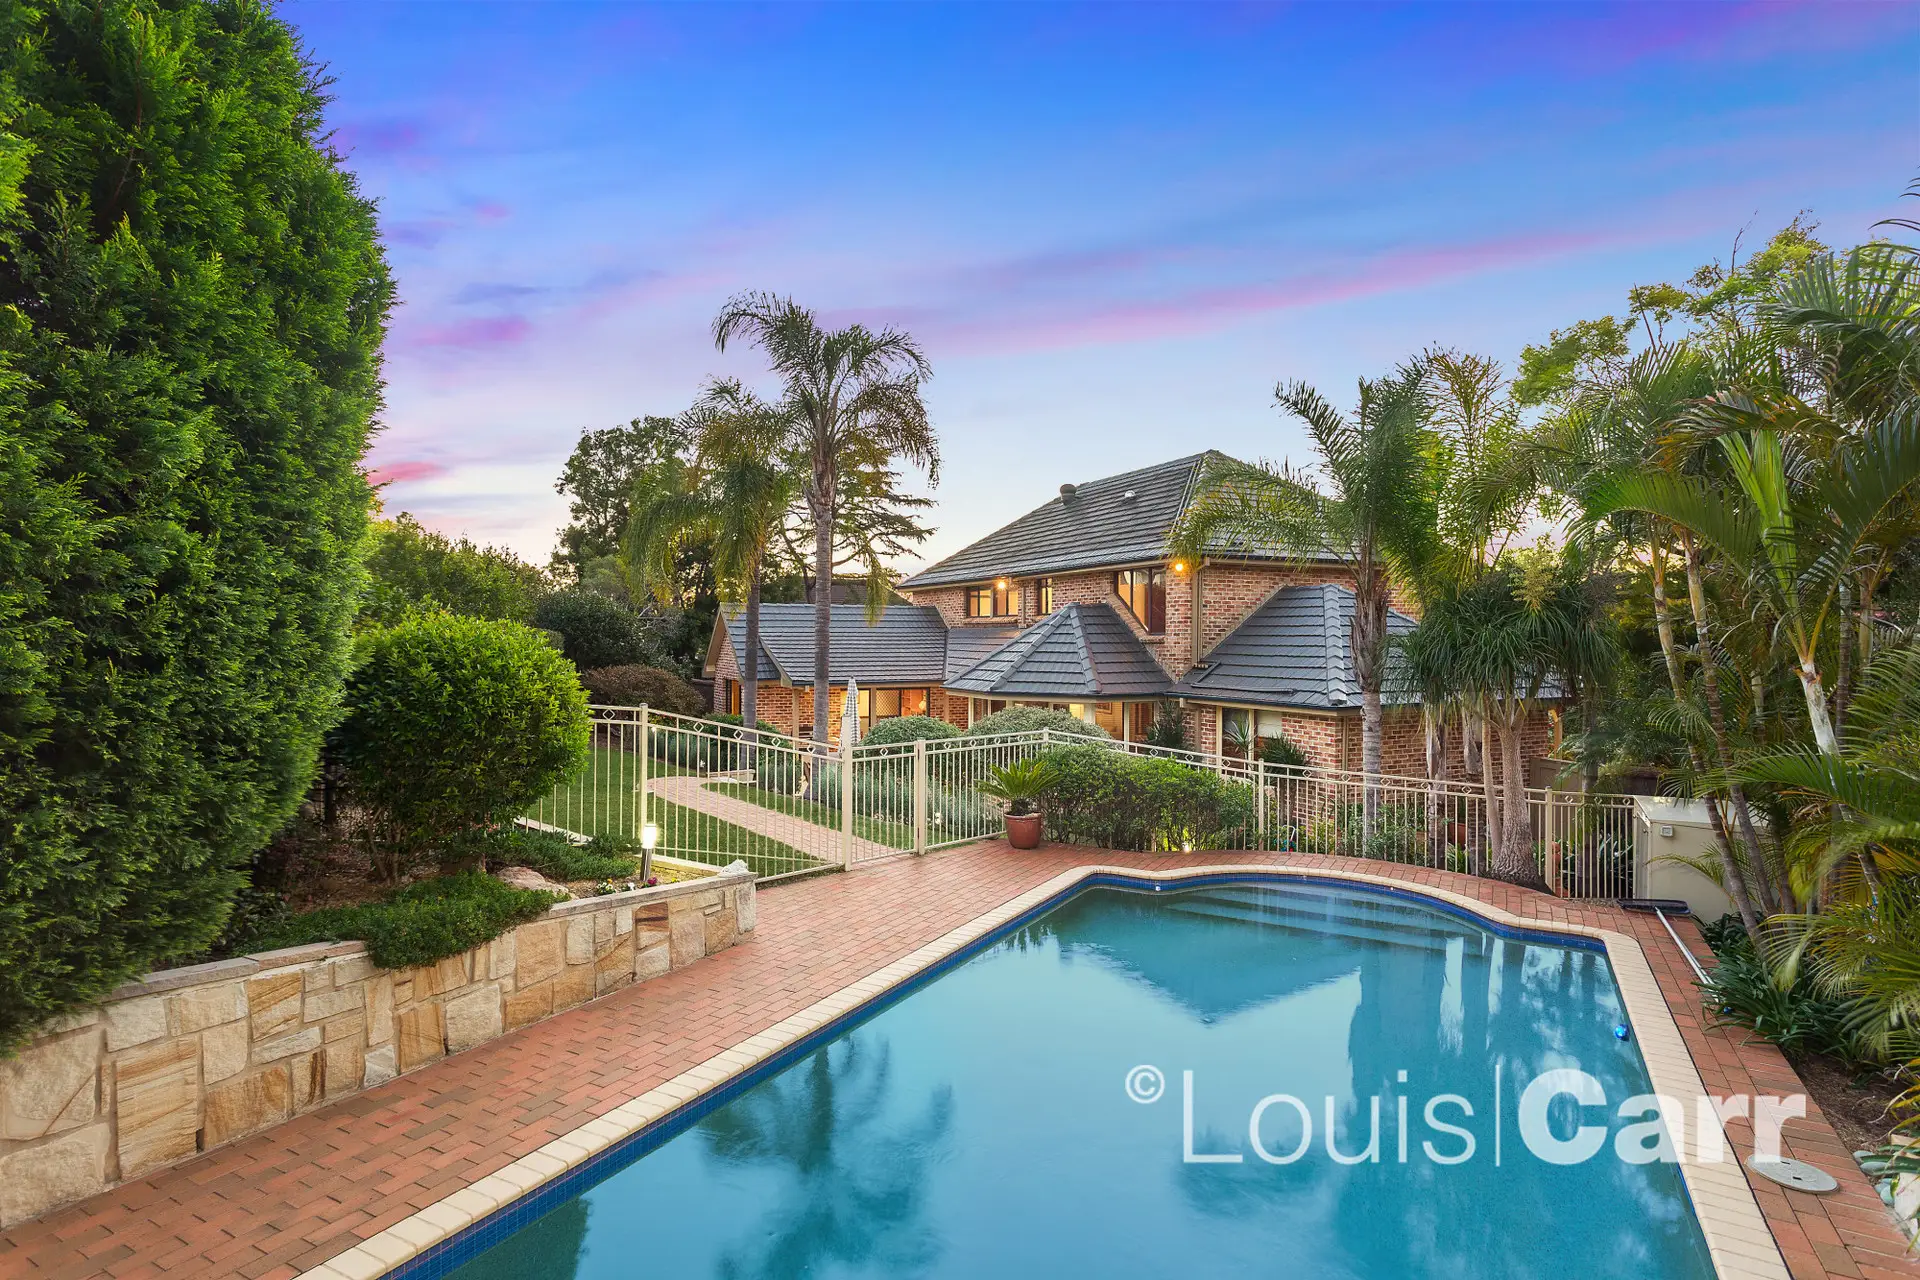 Photo #2: 7 Rosella Way, West Pennant Hills - Sold by Louis Carr Real Estate